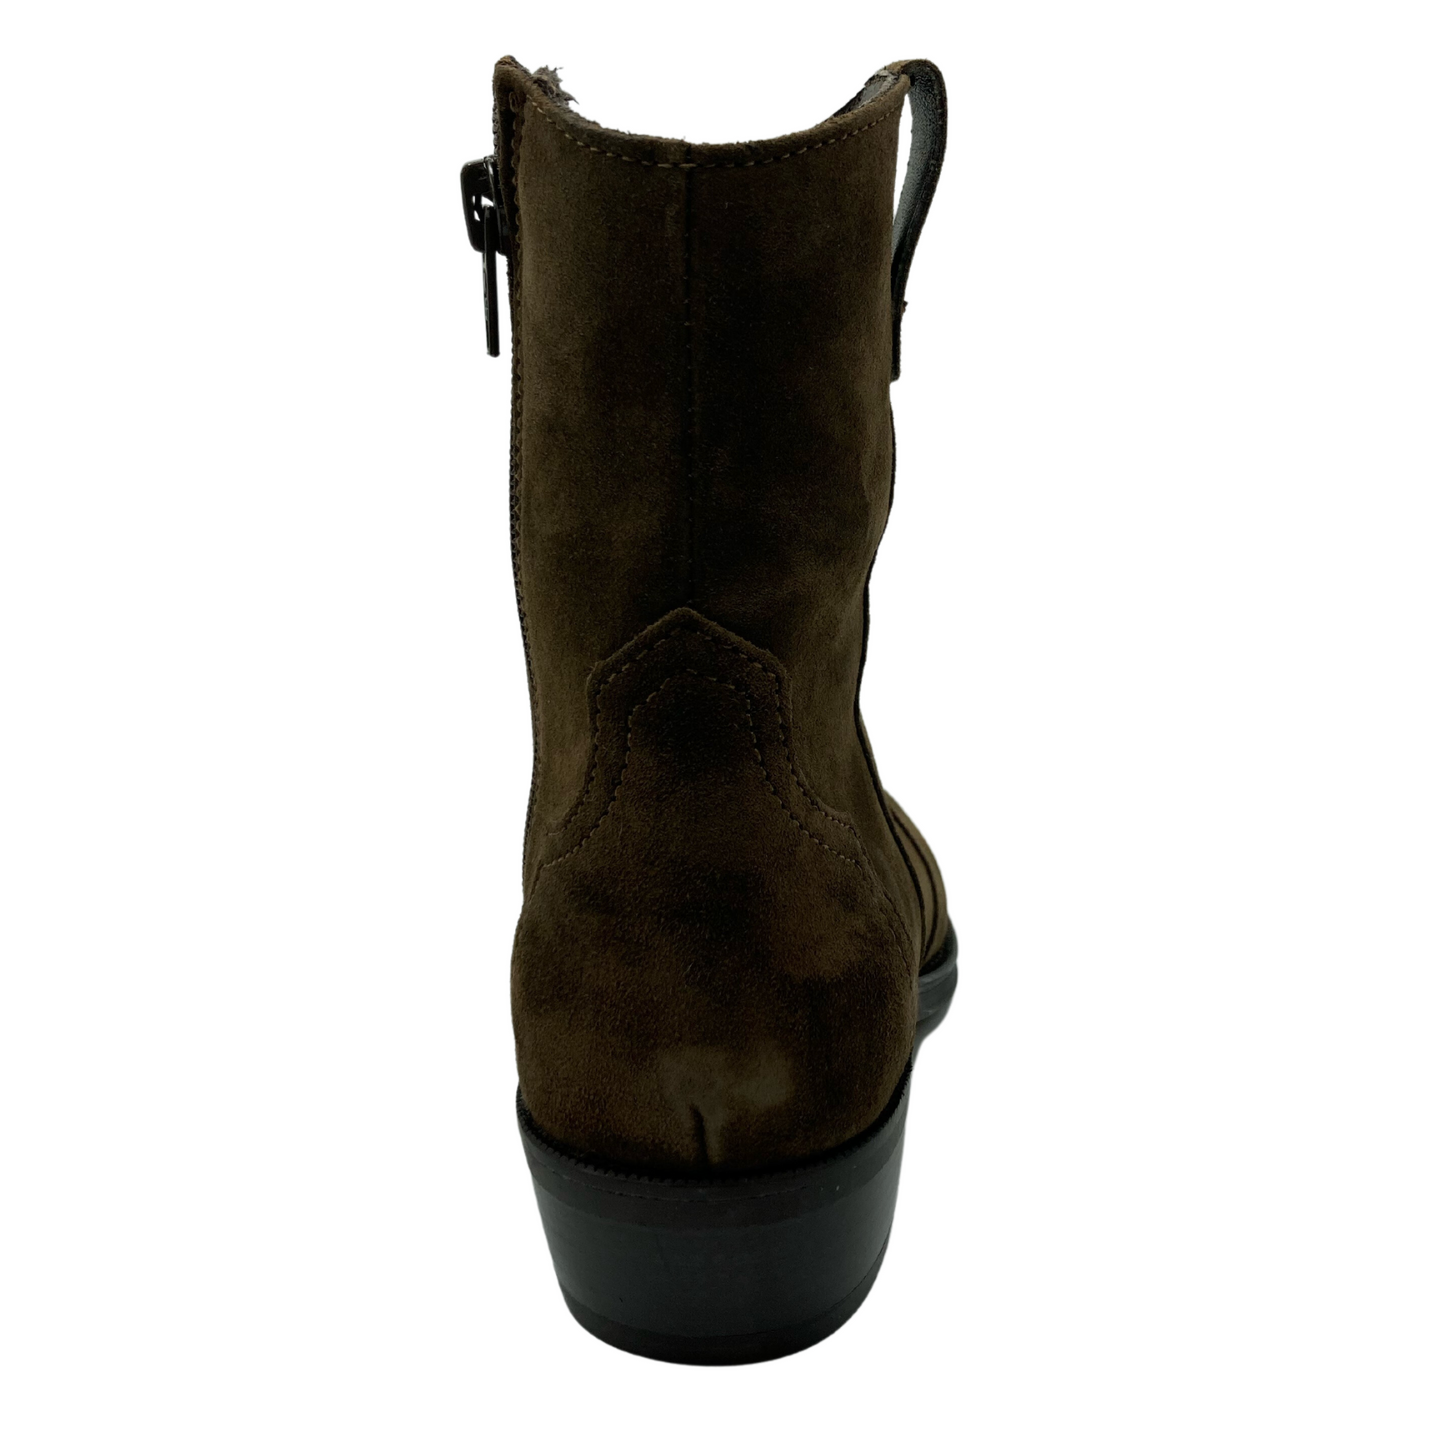 Heel view of short suede cowboy boot with stacked heel and side zipper closure